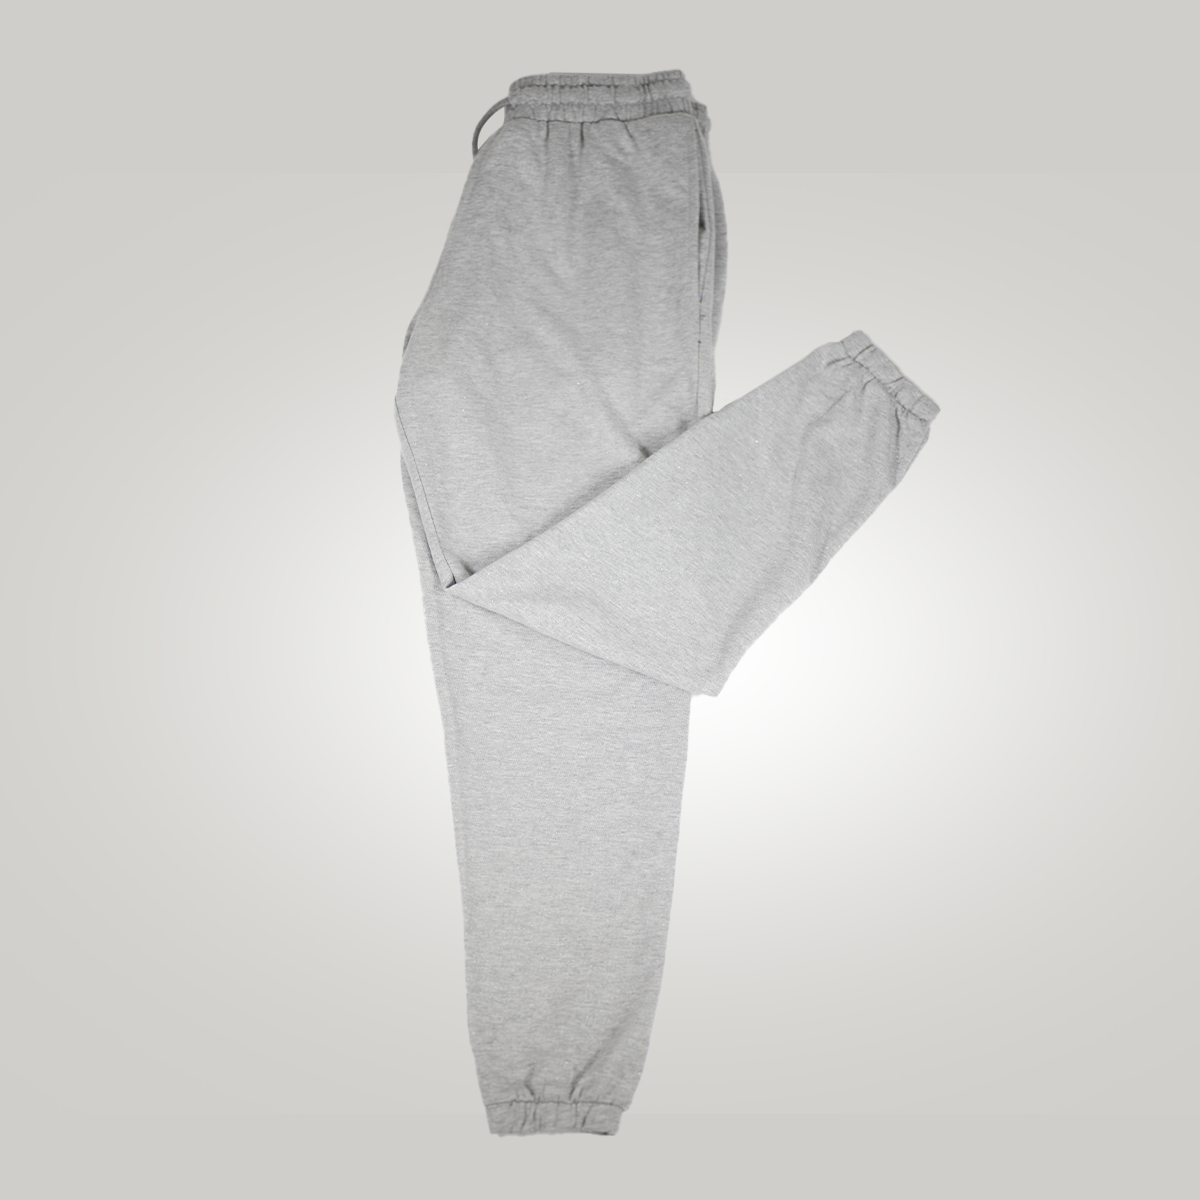 White Soft French Terry Jogger Pants for men and women's 